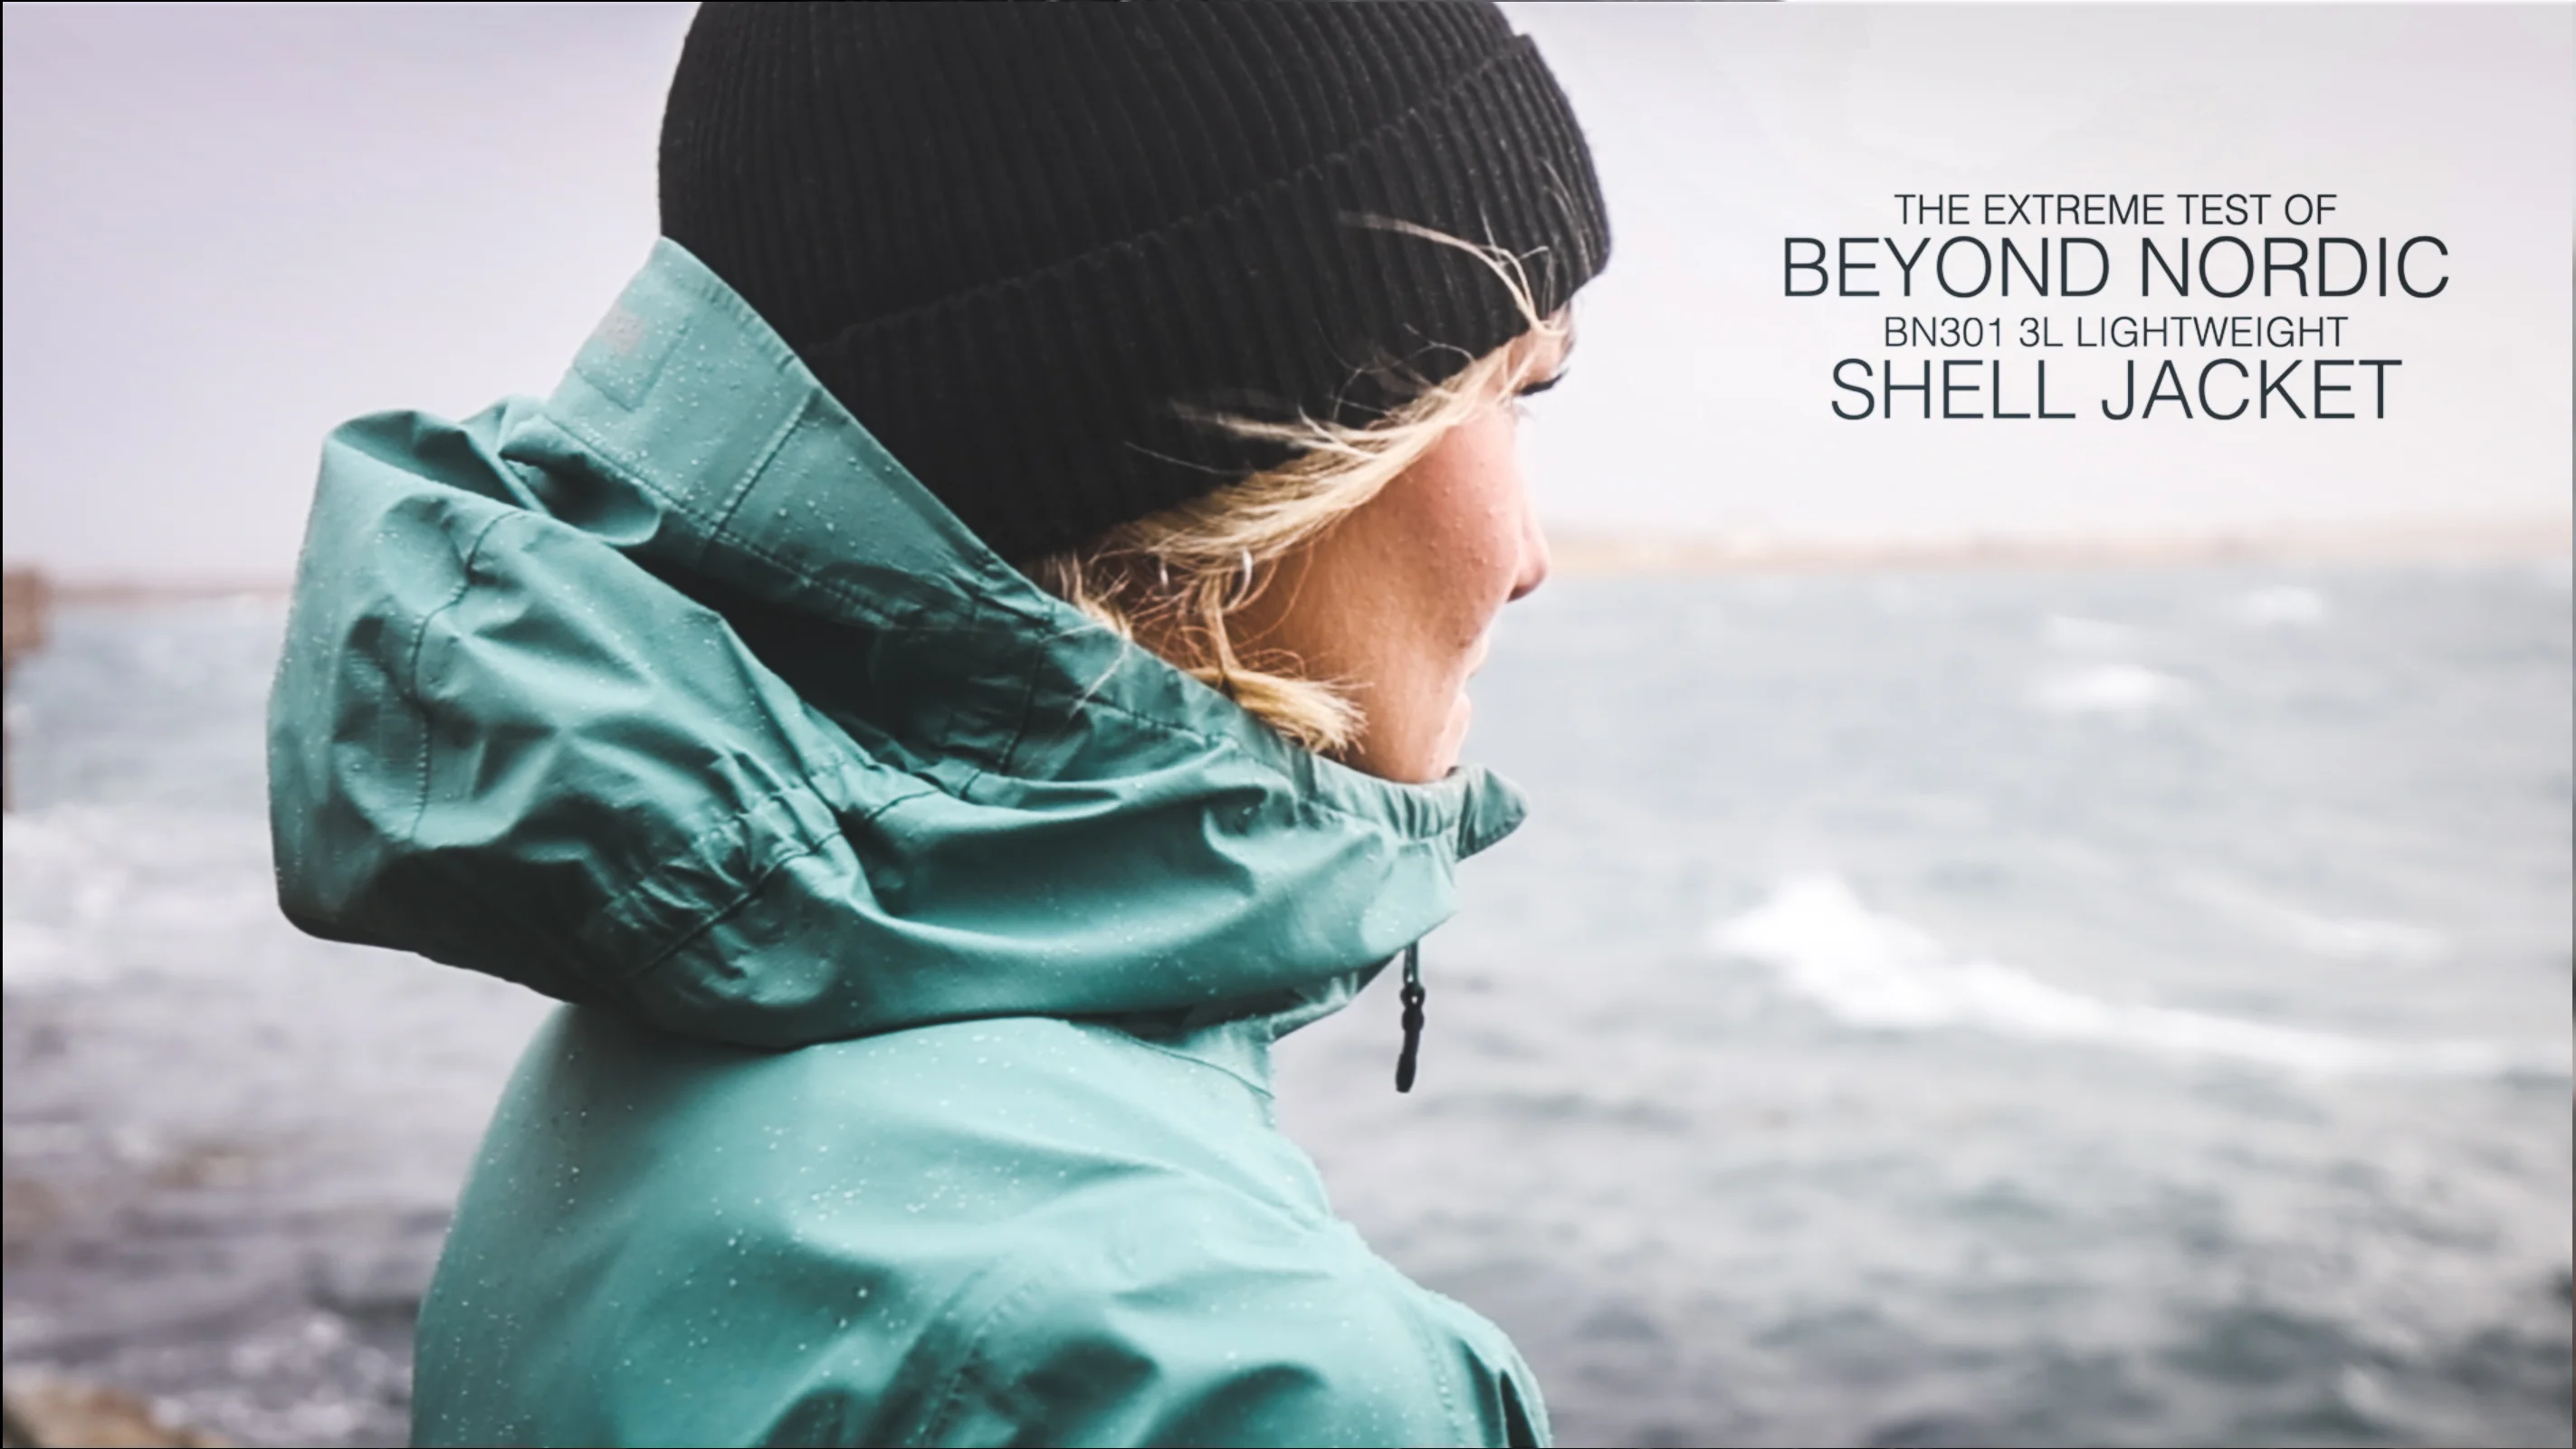 BN301 3L Lightweight Shell Jacket from Beyond Nordic on Vimeo